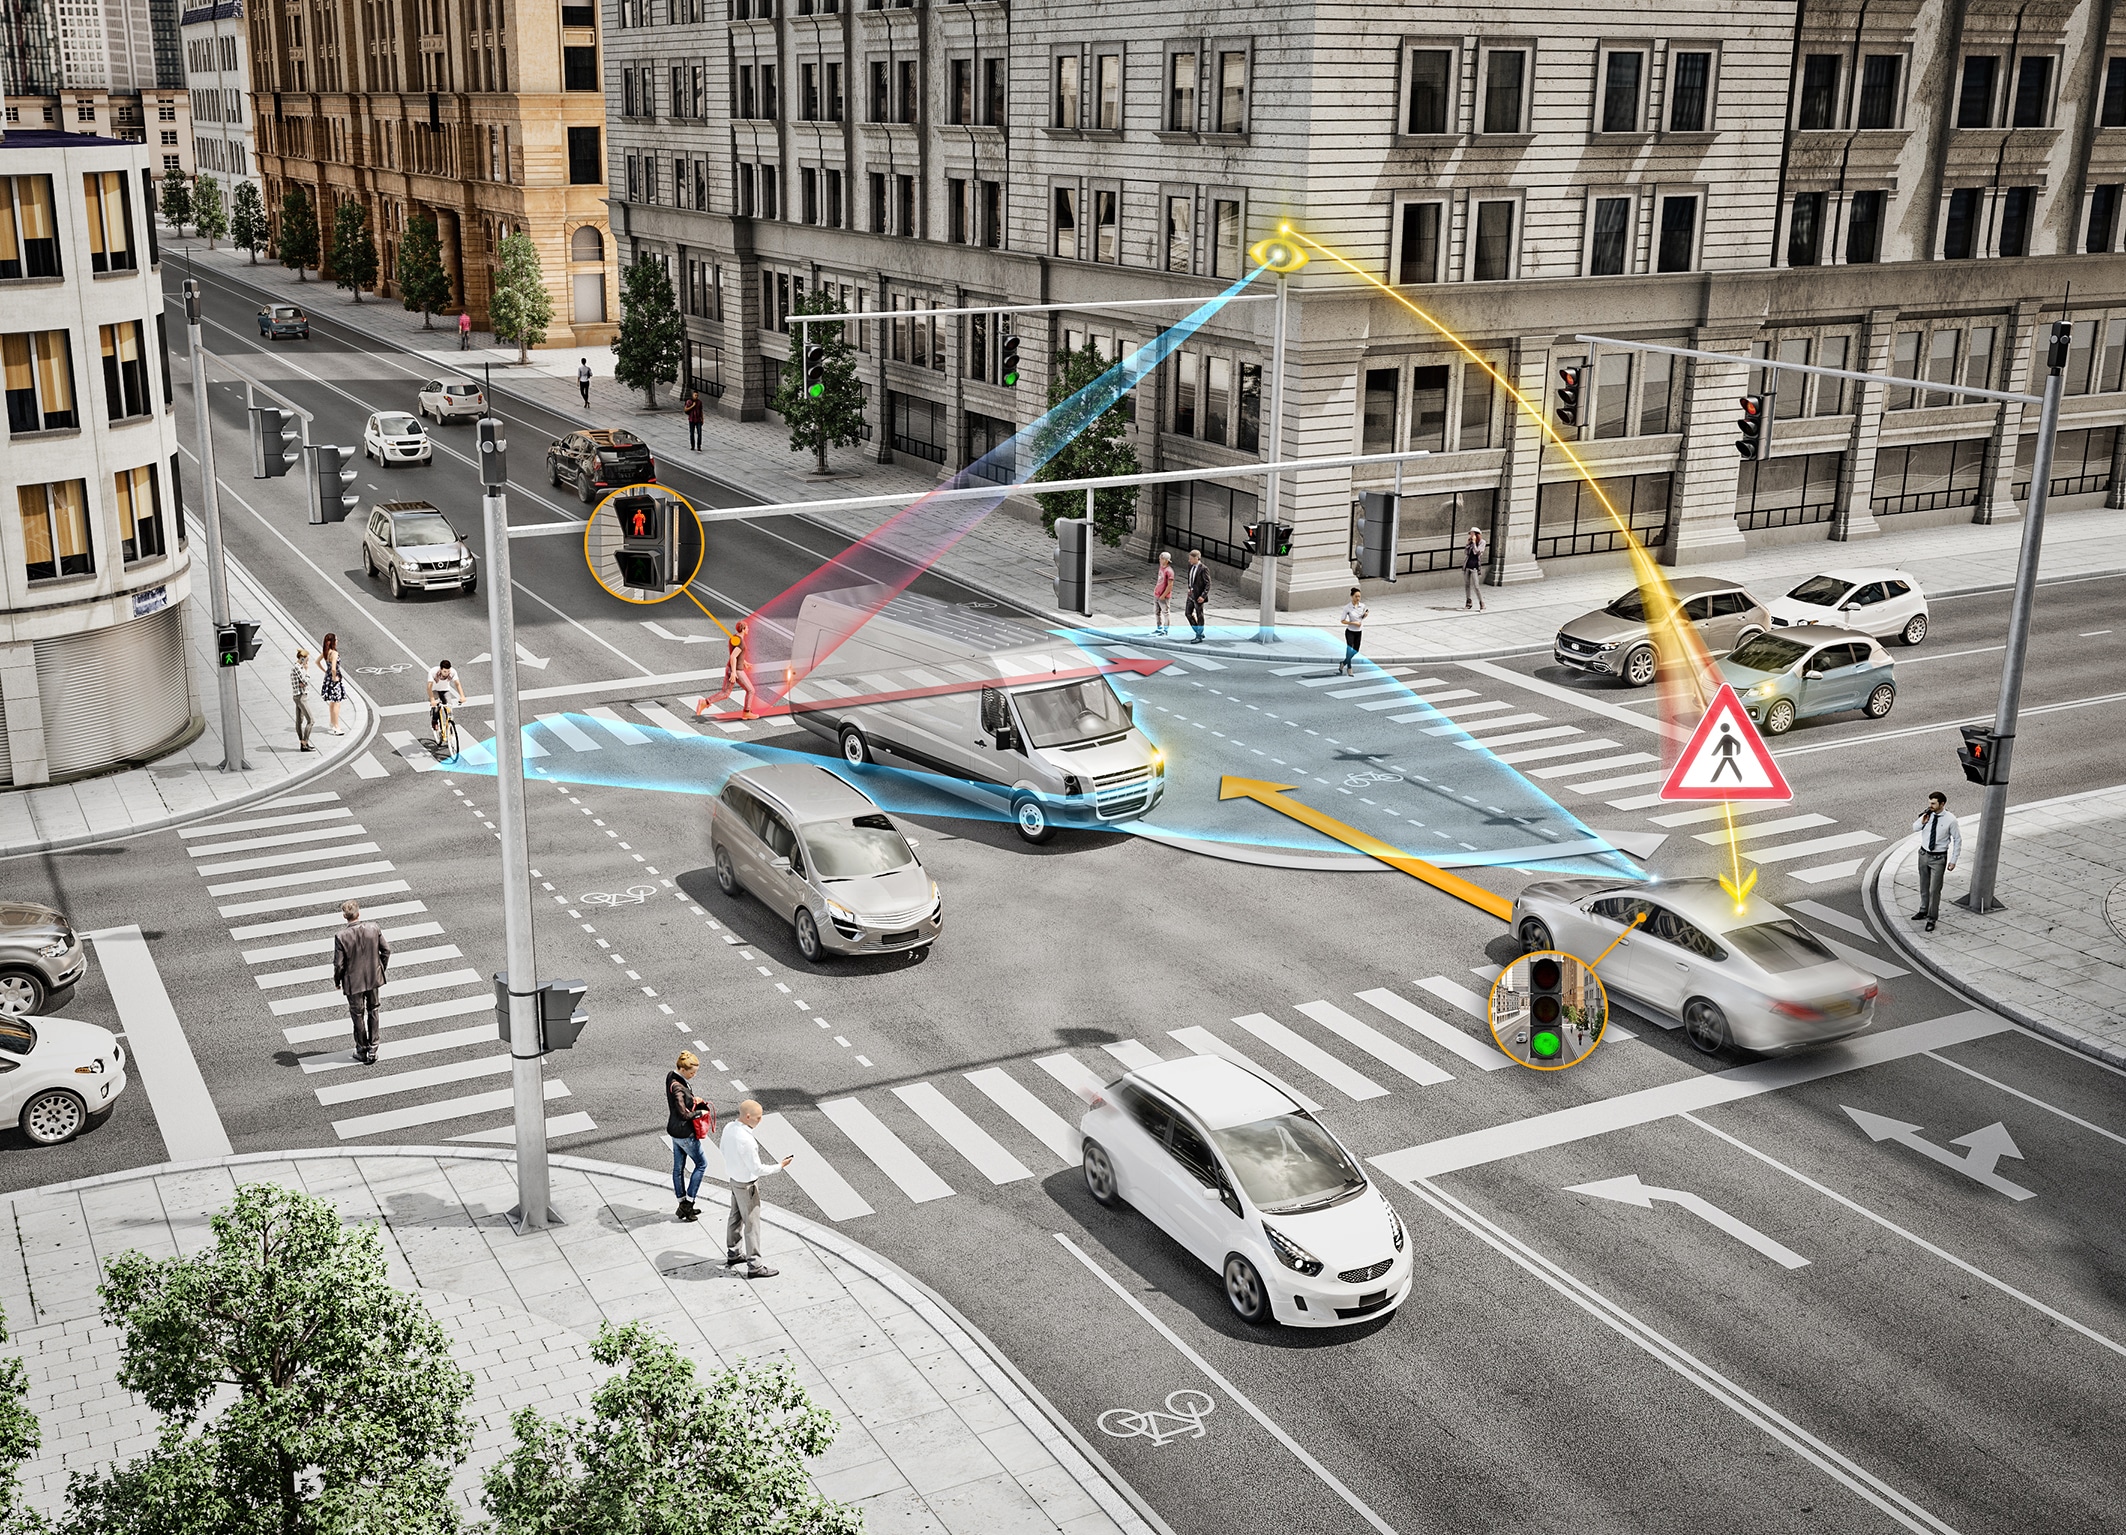 Continental is developing solutions for urban automated driving issues